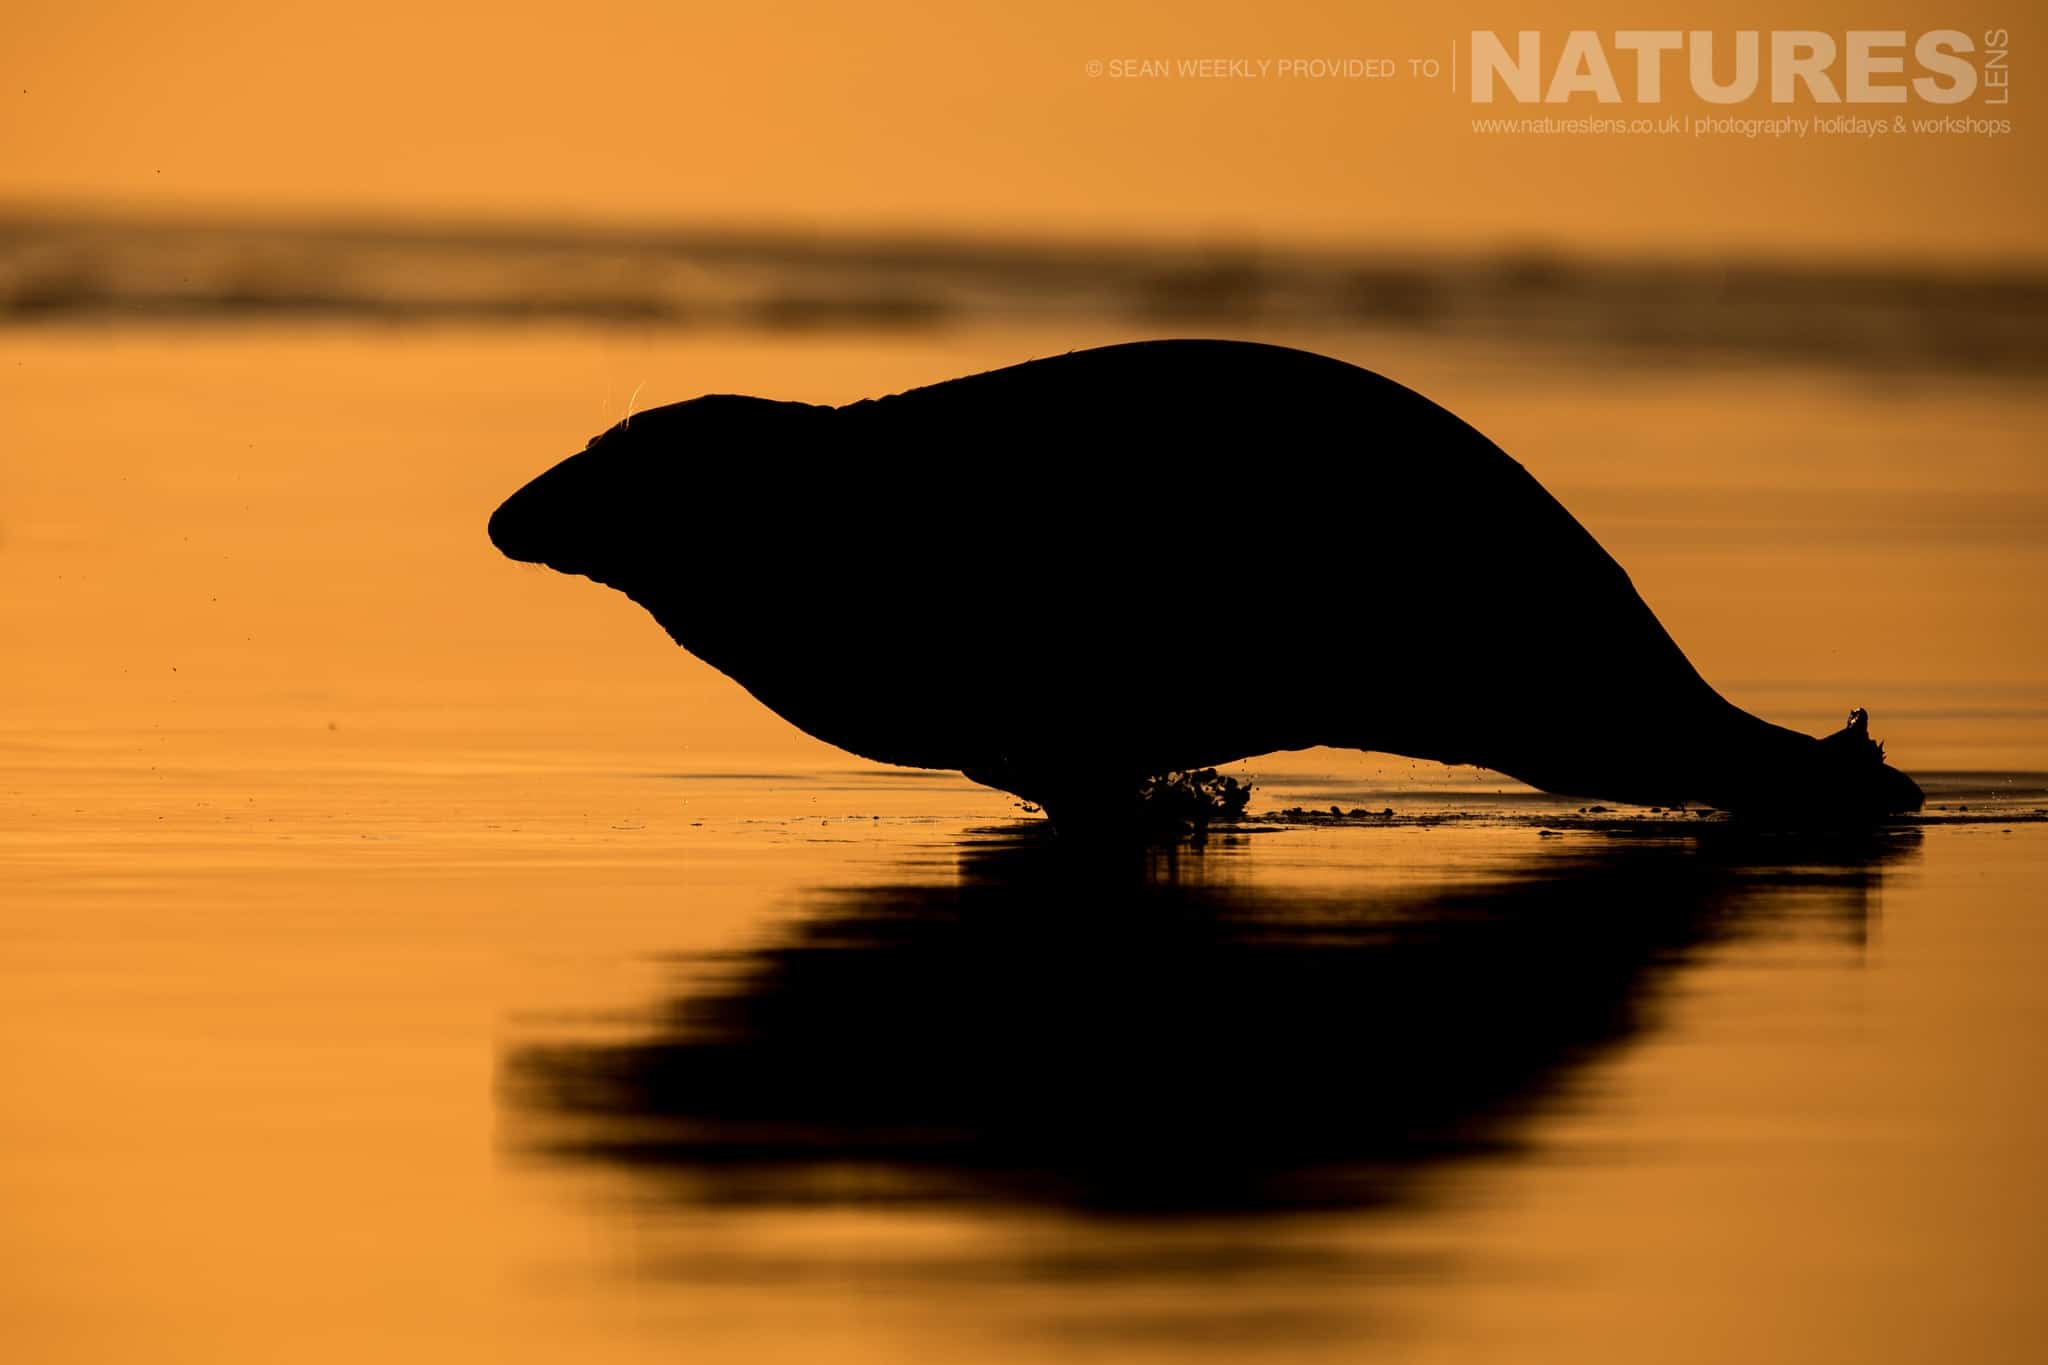 One of the seal moves at speed across the shallow waters at sunrise photographed on the Seals of Lincolnshire Photography Holiday run by NaturesLens